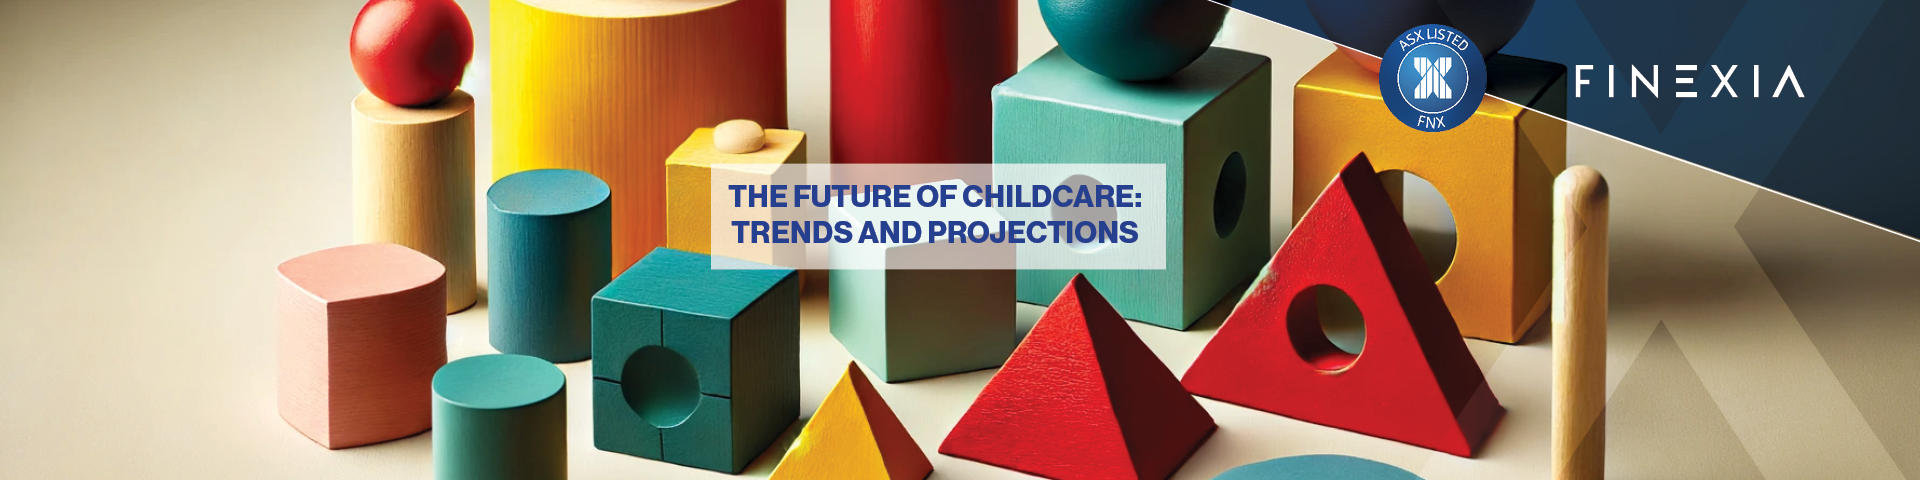 The Future of Childcare: Trends and Projections